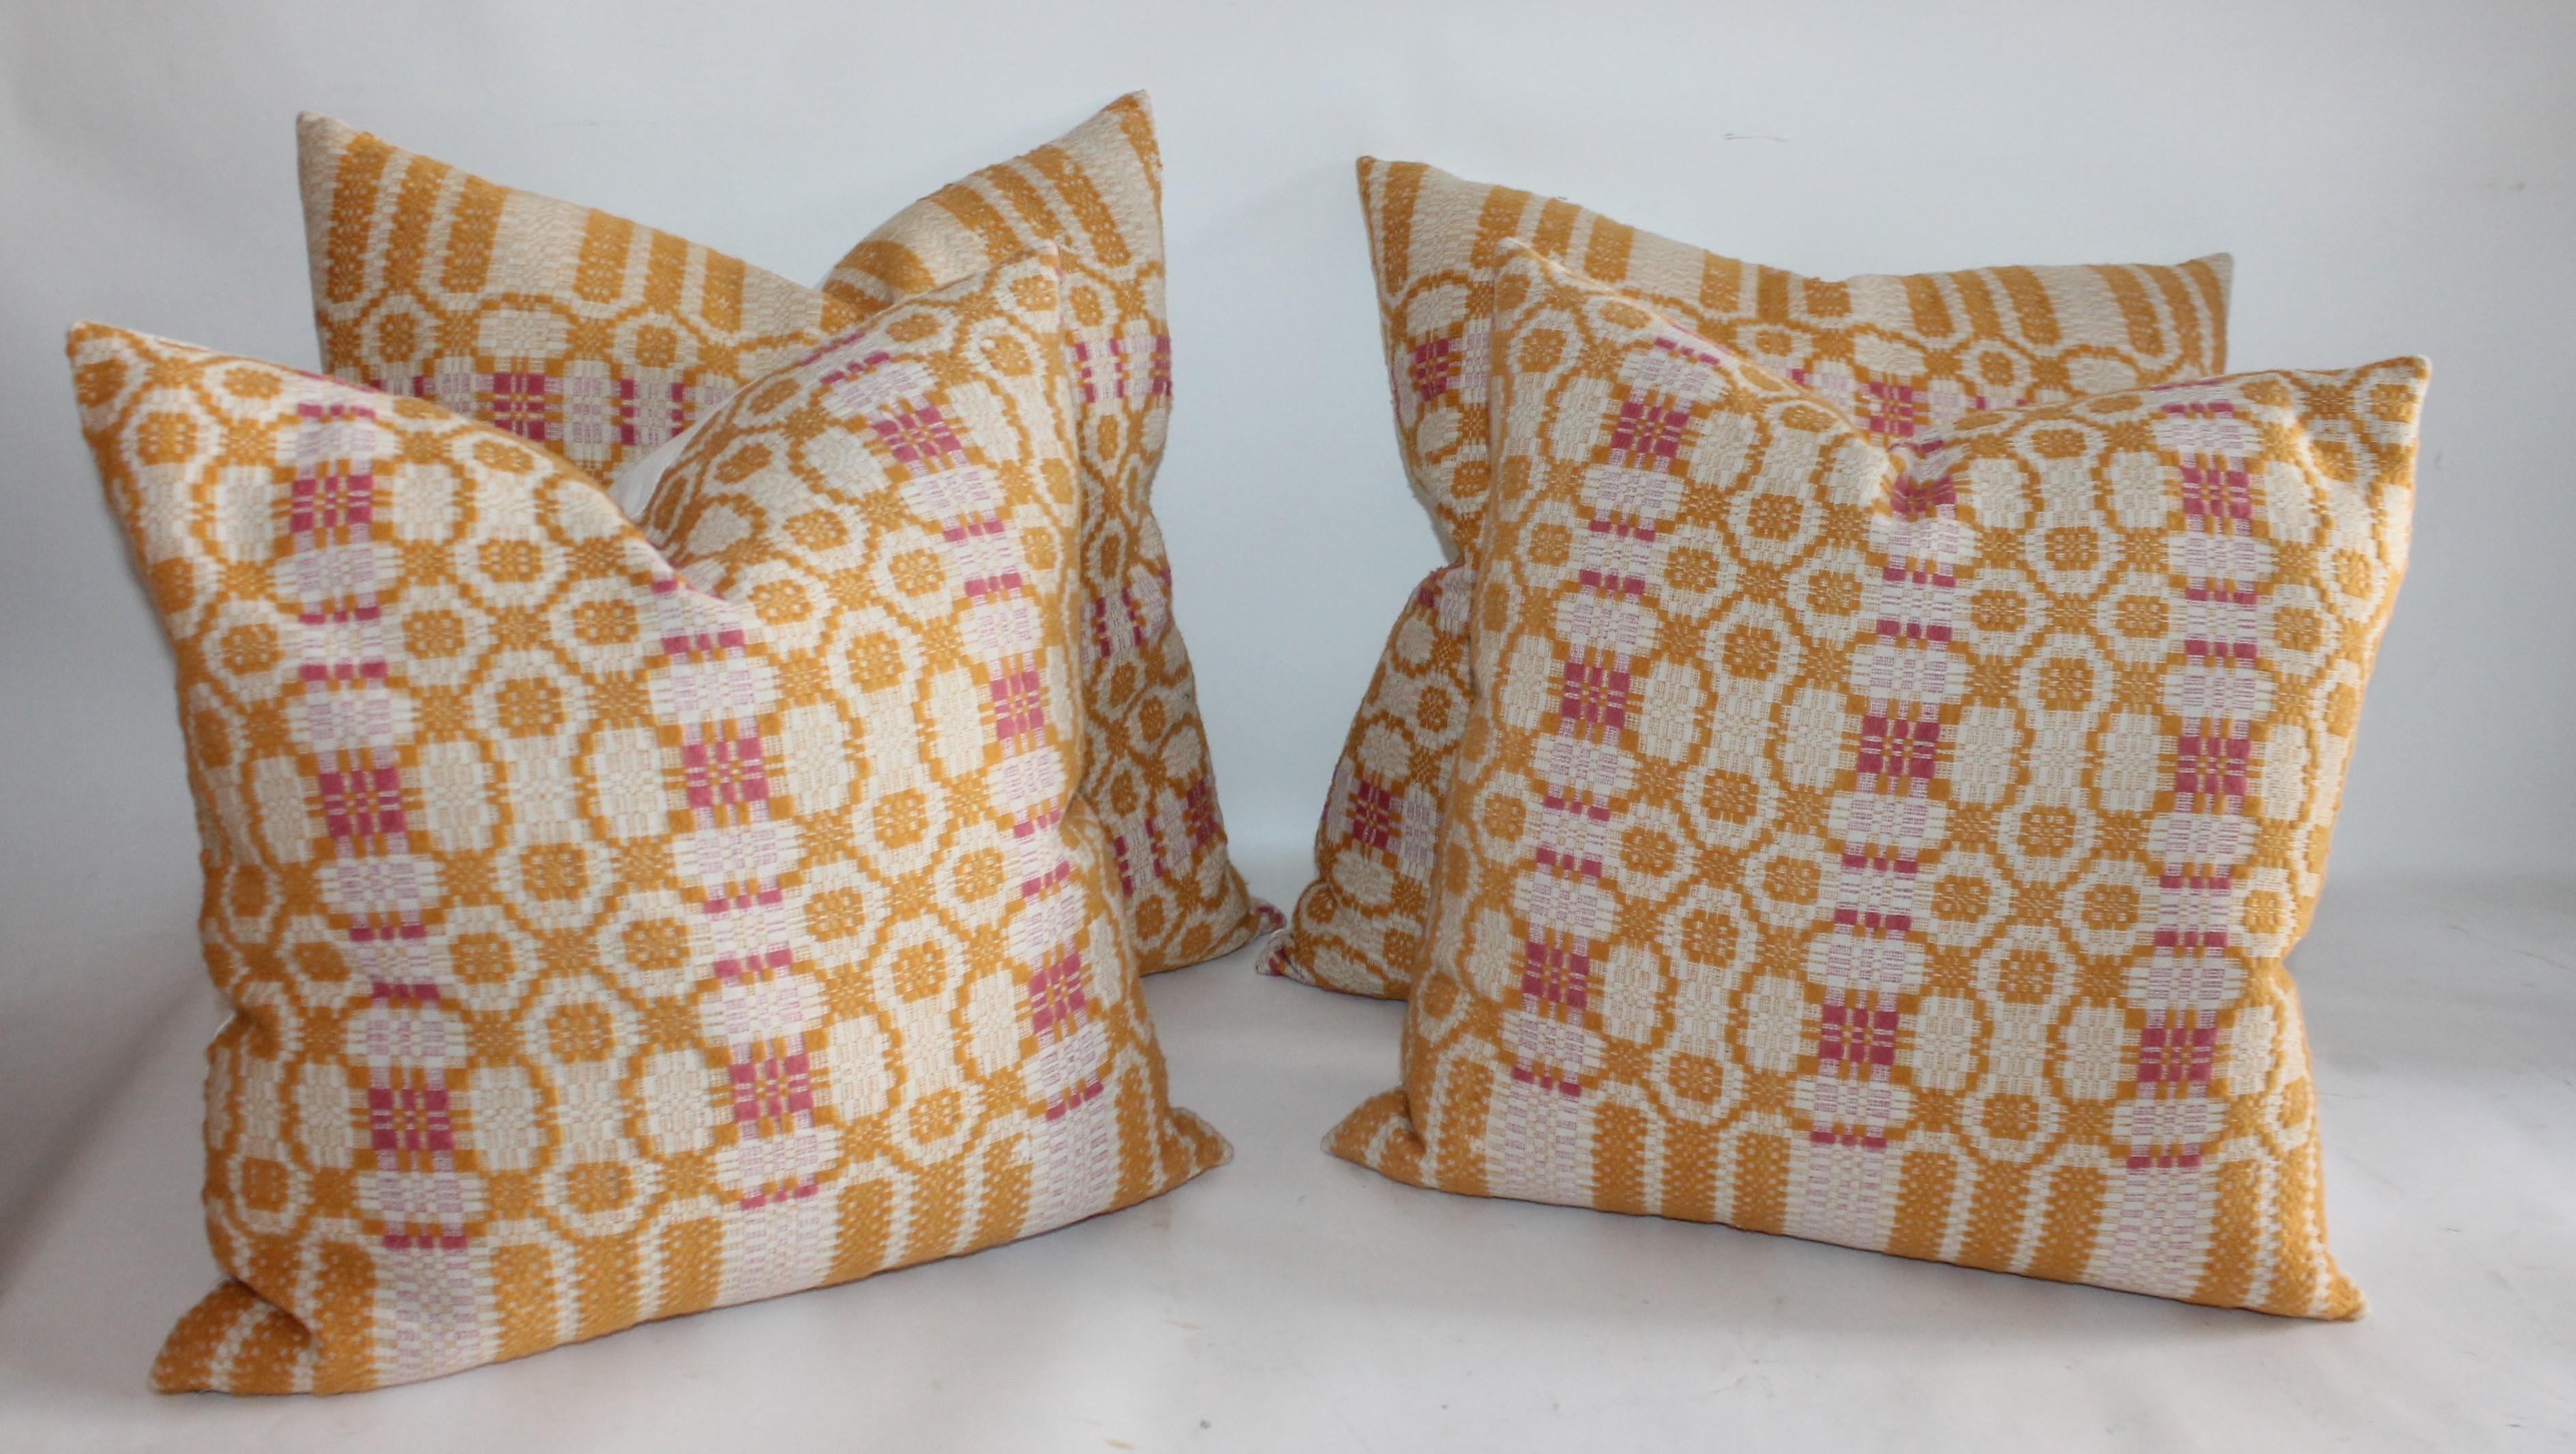 These two pairs of golden mustard & salmon hand woven jacquard coverlet pillows have white cotton linen backings. All in great condition. Down & feather fill.
Measures: 22 x 22 pair
18 x 18 pair.